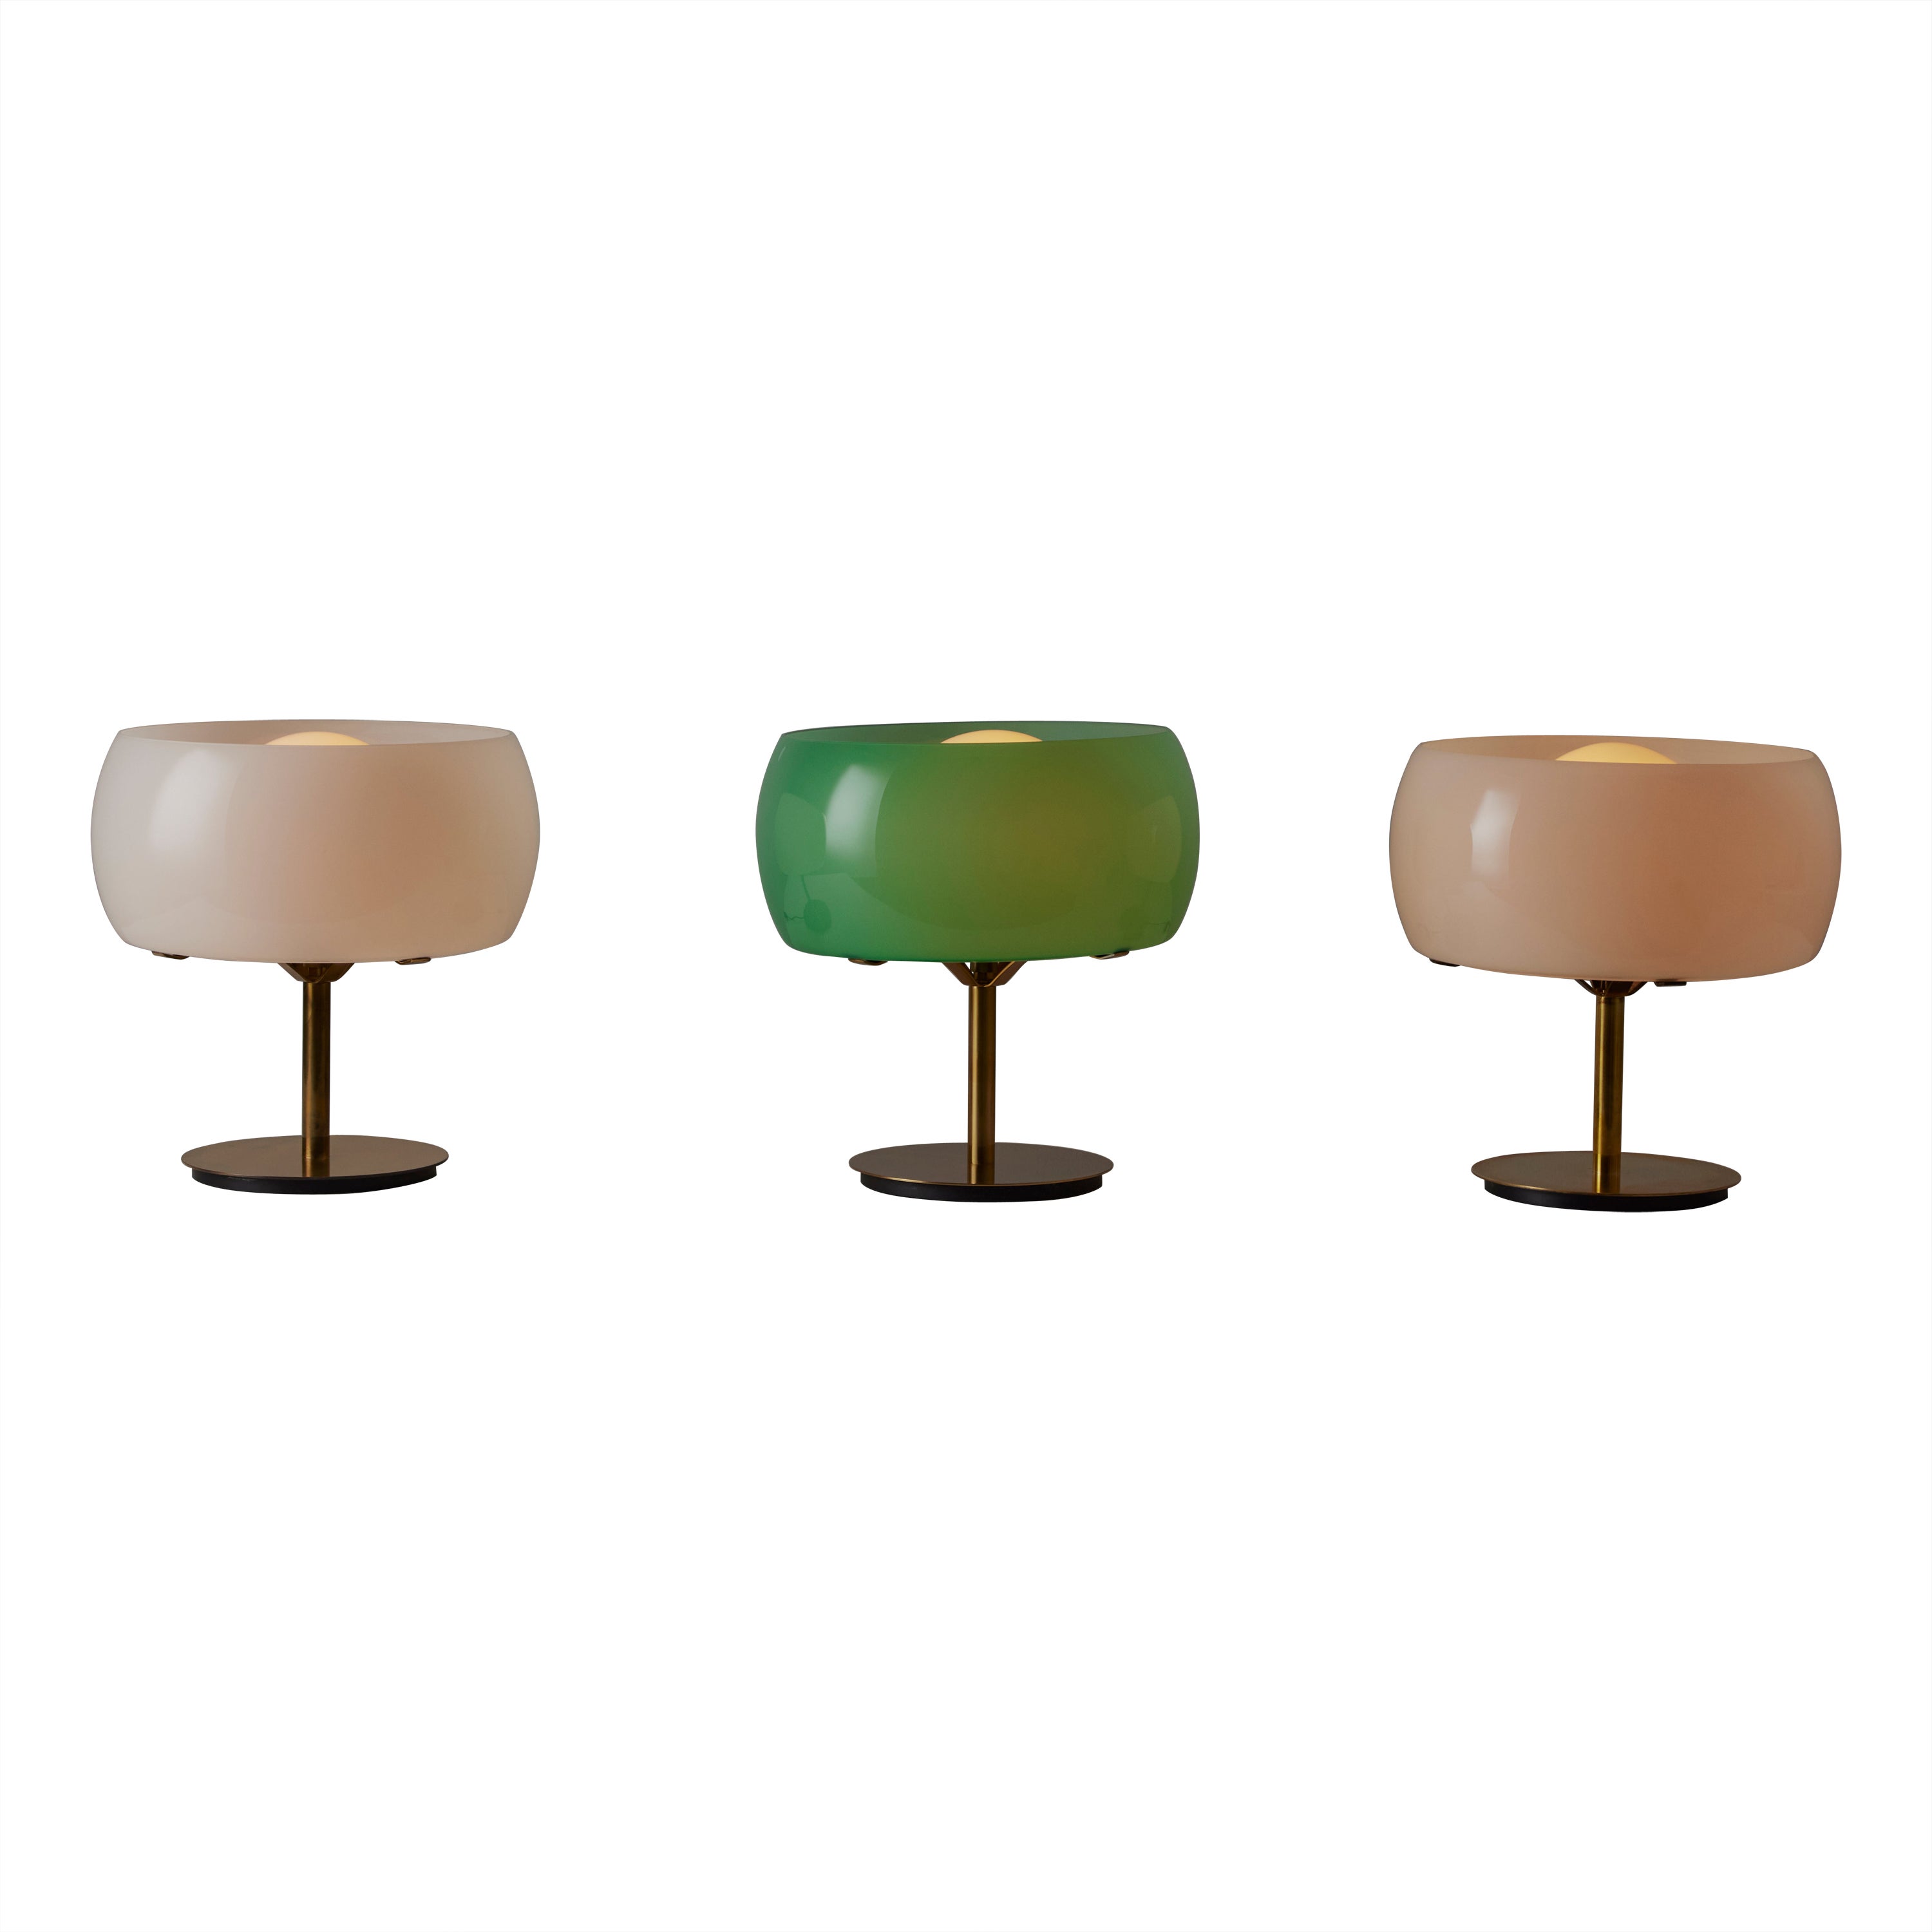 Pair of 'Erse' Table Lamps by Vico Magistretti for Artemide